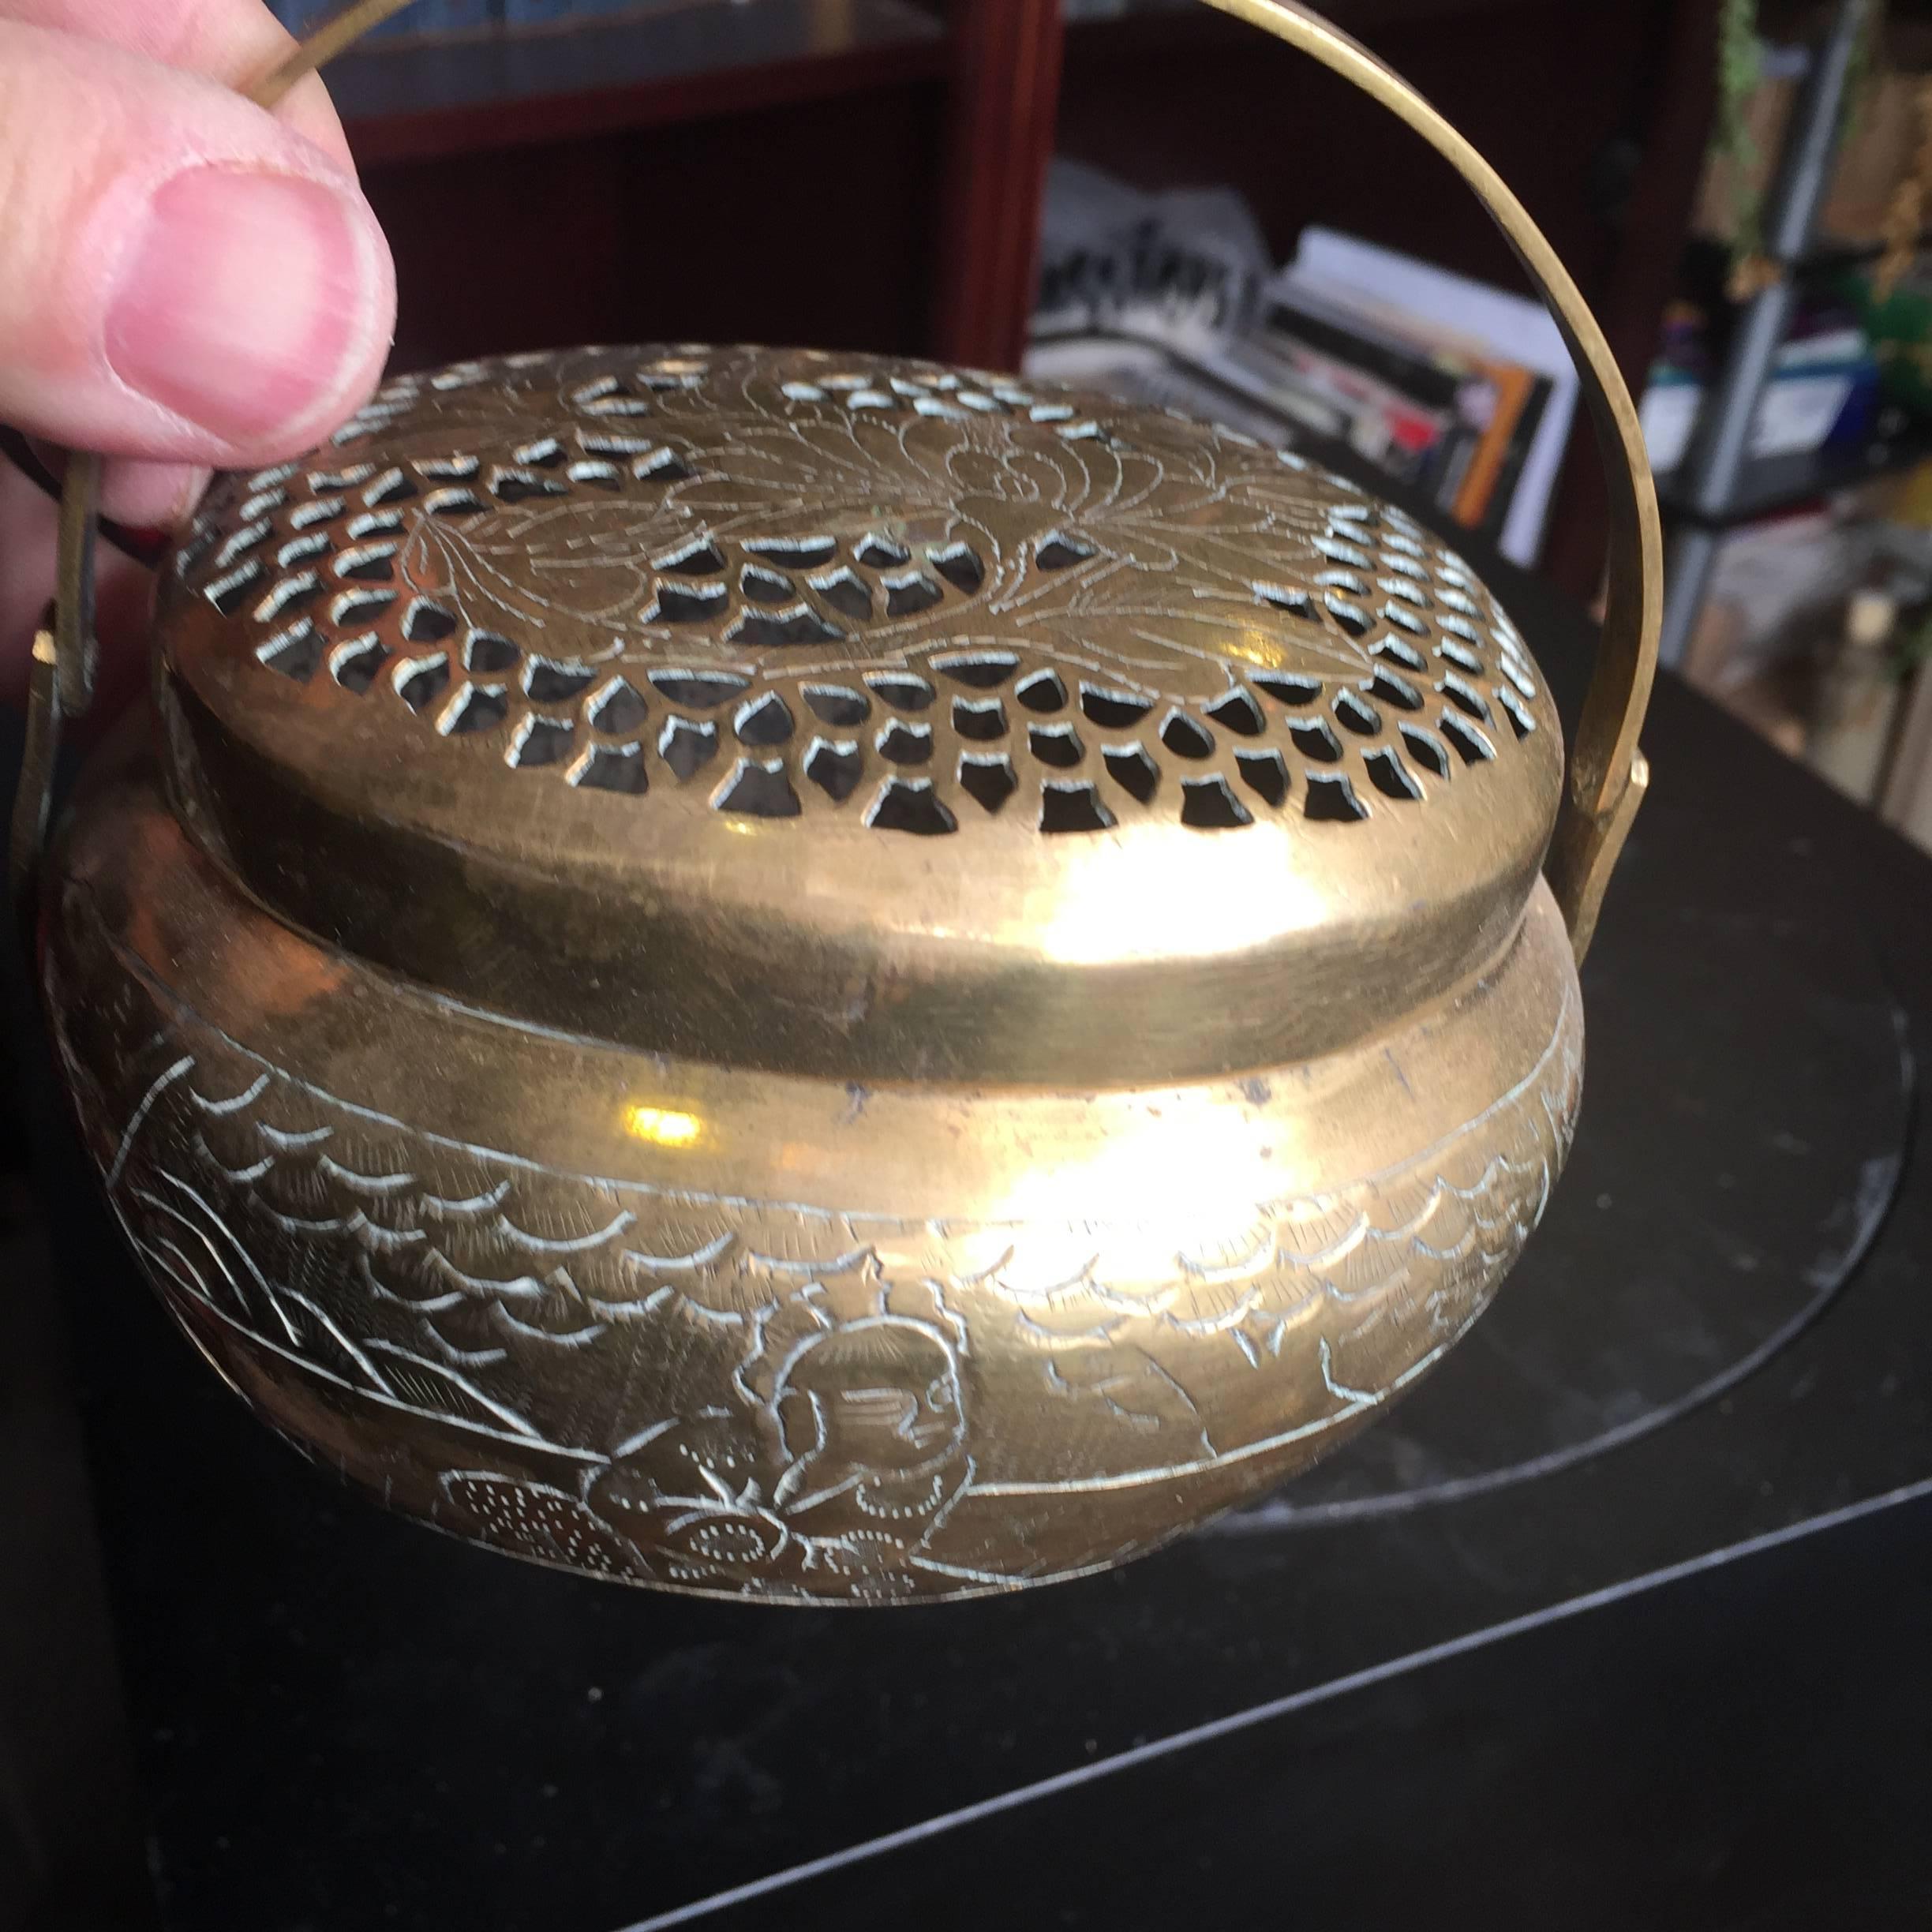 Qing China Antique Metal Hand Warmer and Incense Burner, 100 Years Old